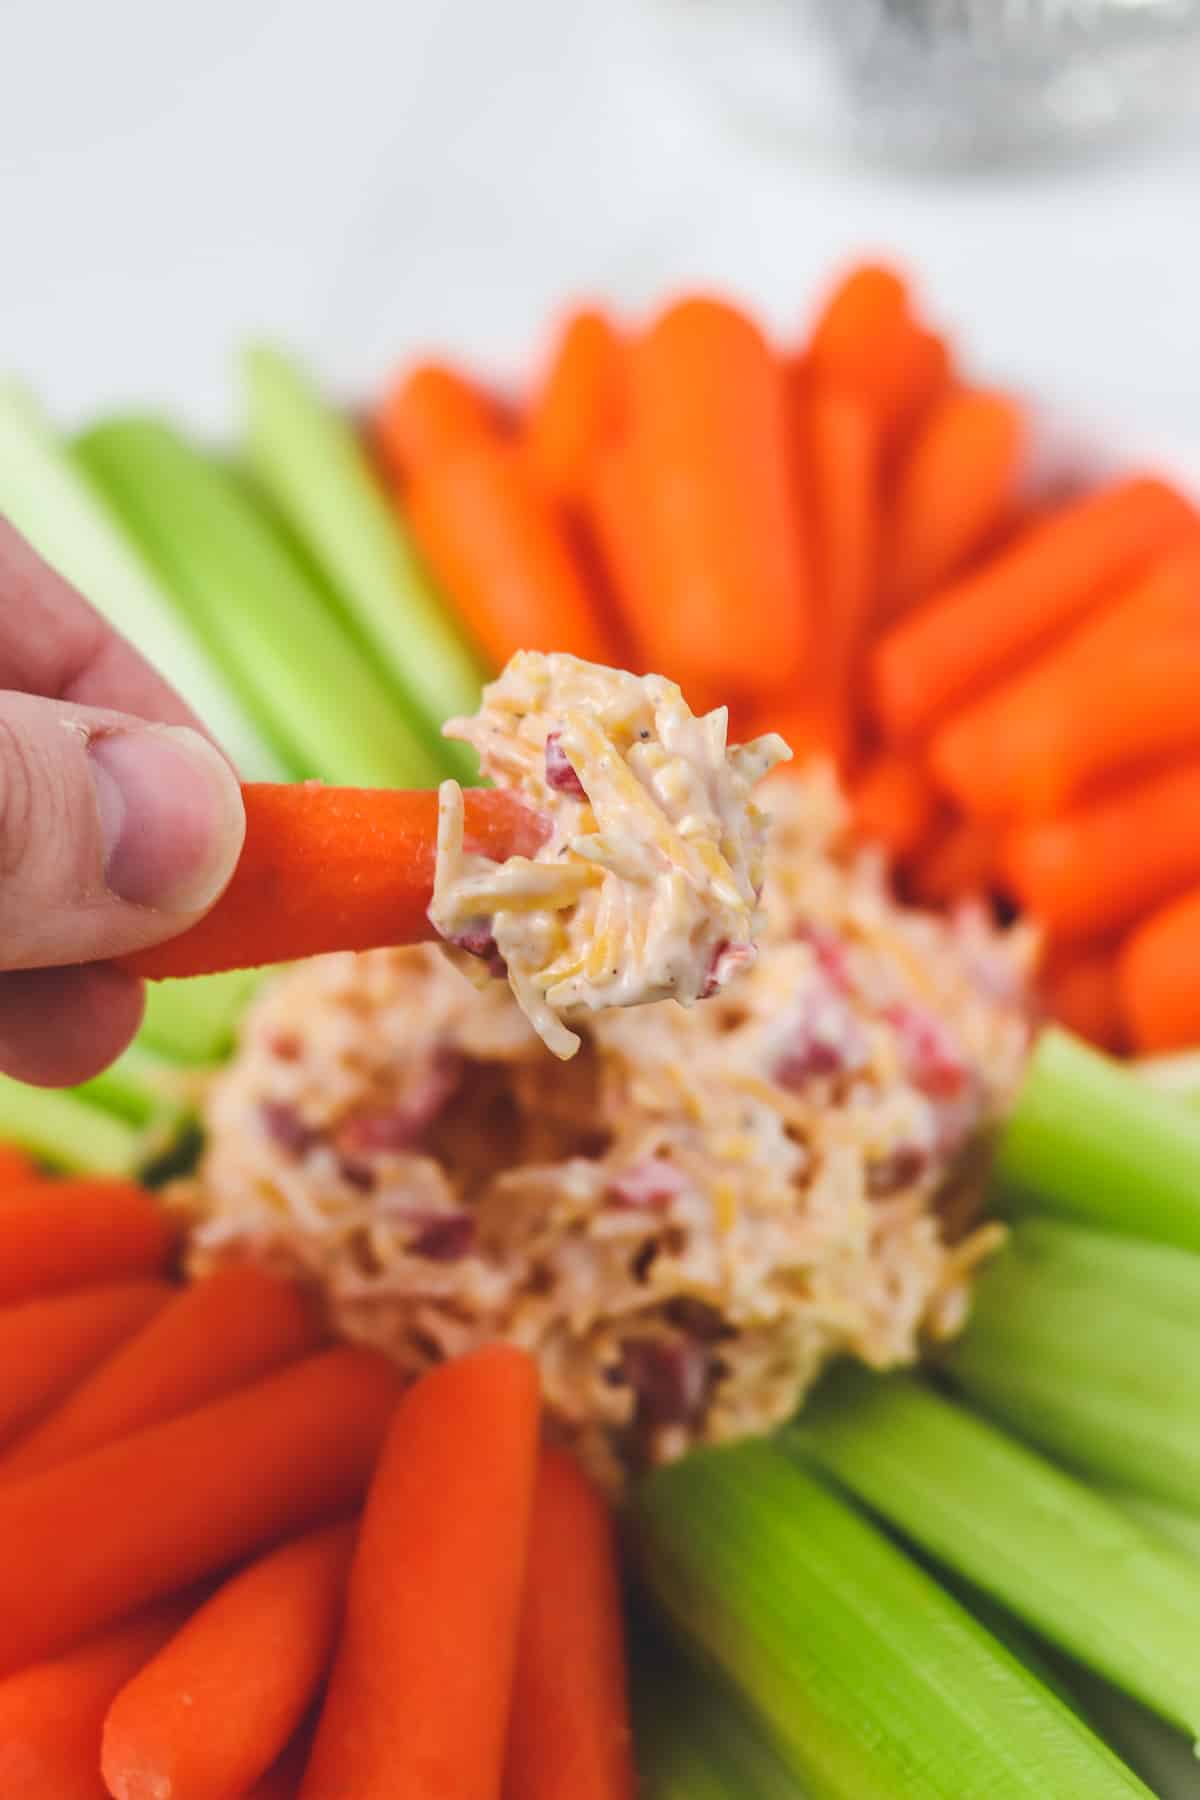 skinny pimento cheese dipped on a carrot